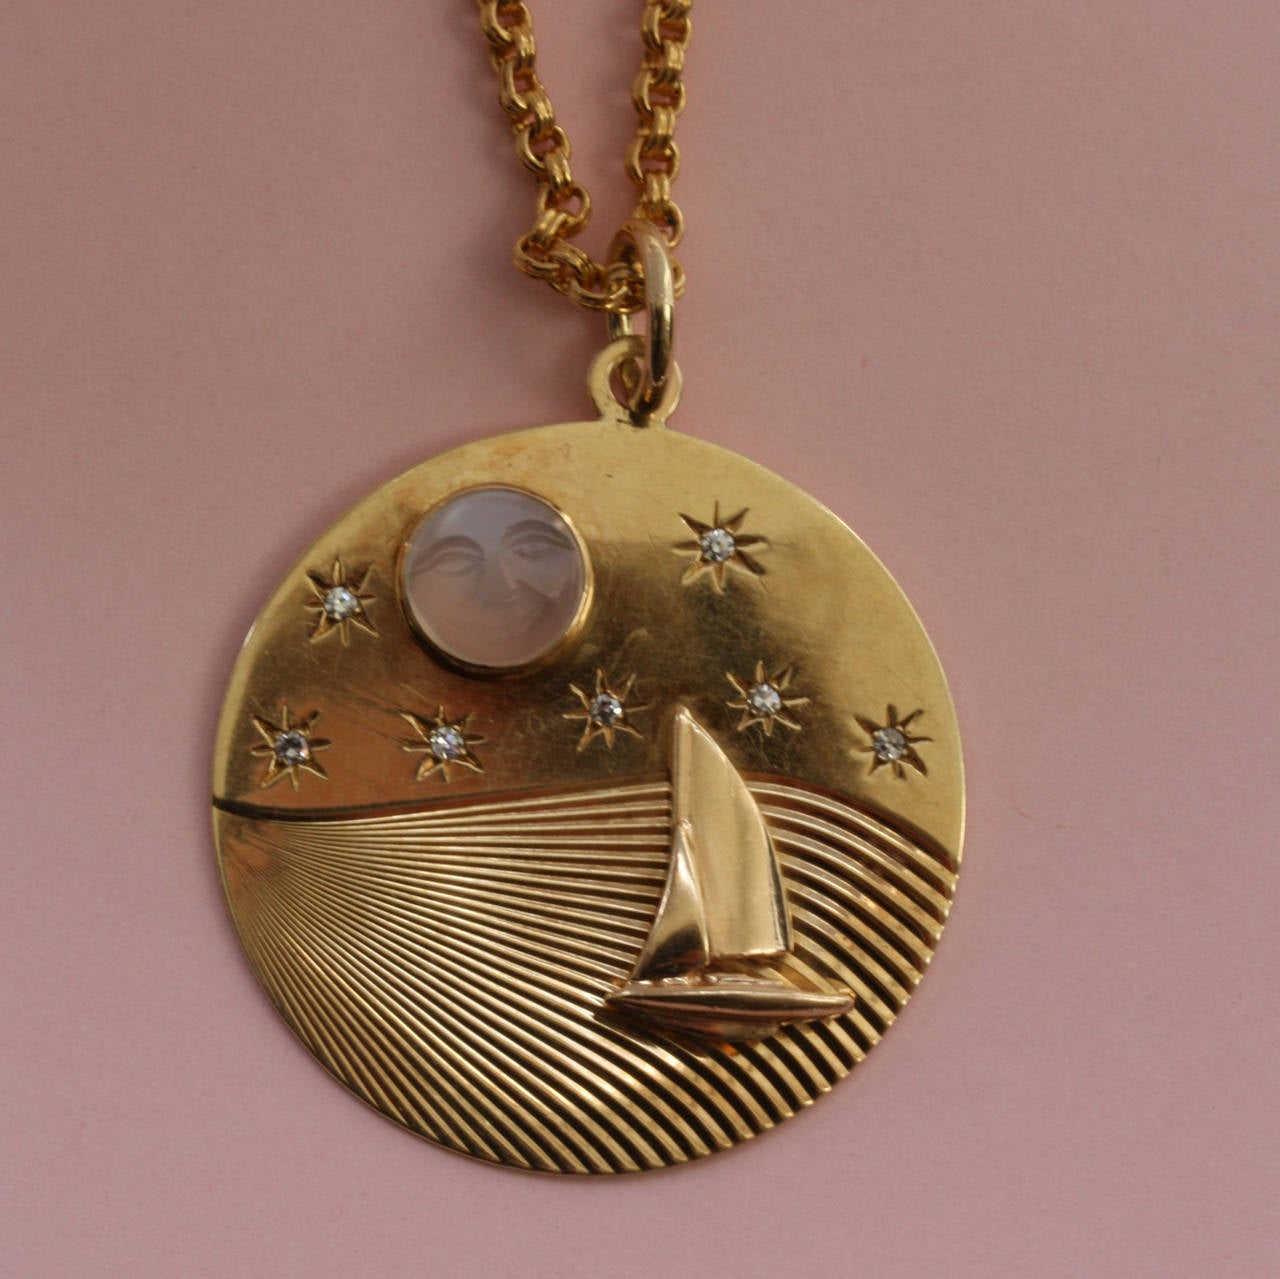 This scene glows with the 14 carat gold of which this charm is made but what it depicts is an evening sail on a calm sea. The moon, fittingly carved from a moonstone, is about to vanish behind horizon; a sailing boat set with seven diamonds is